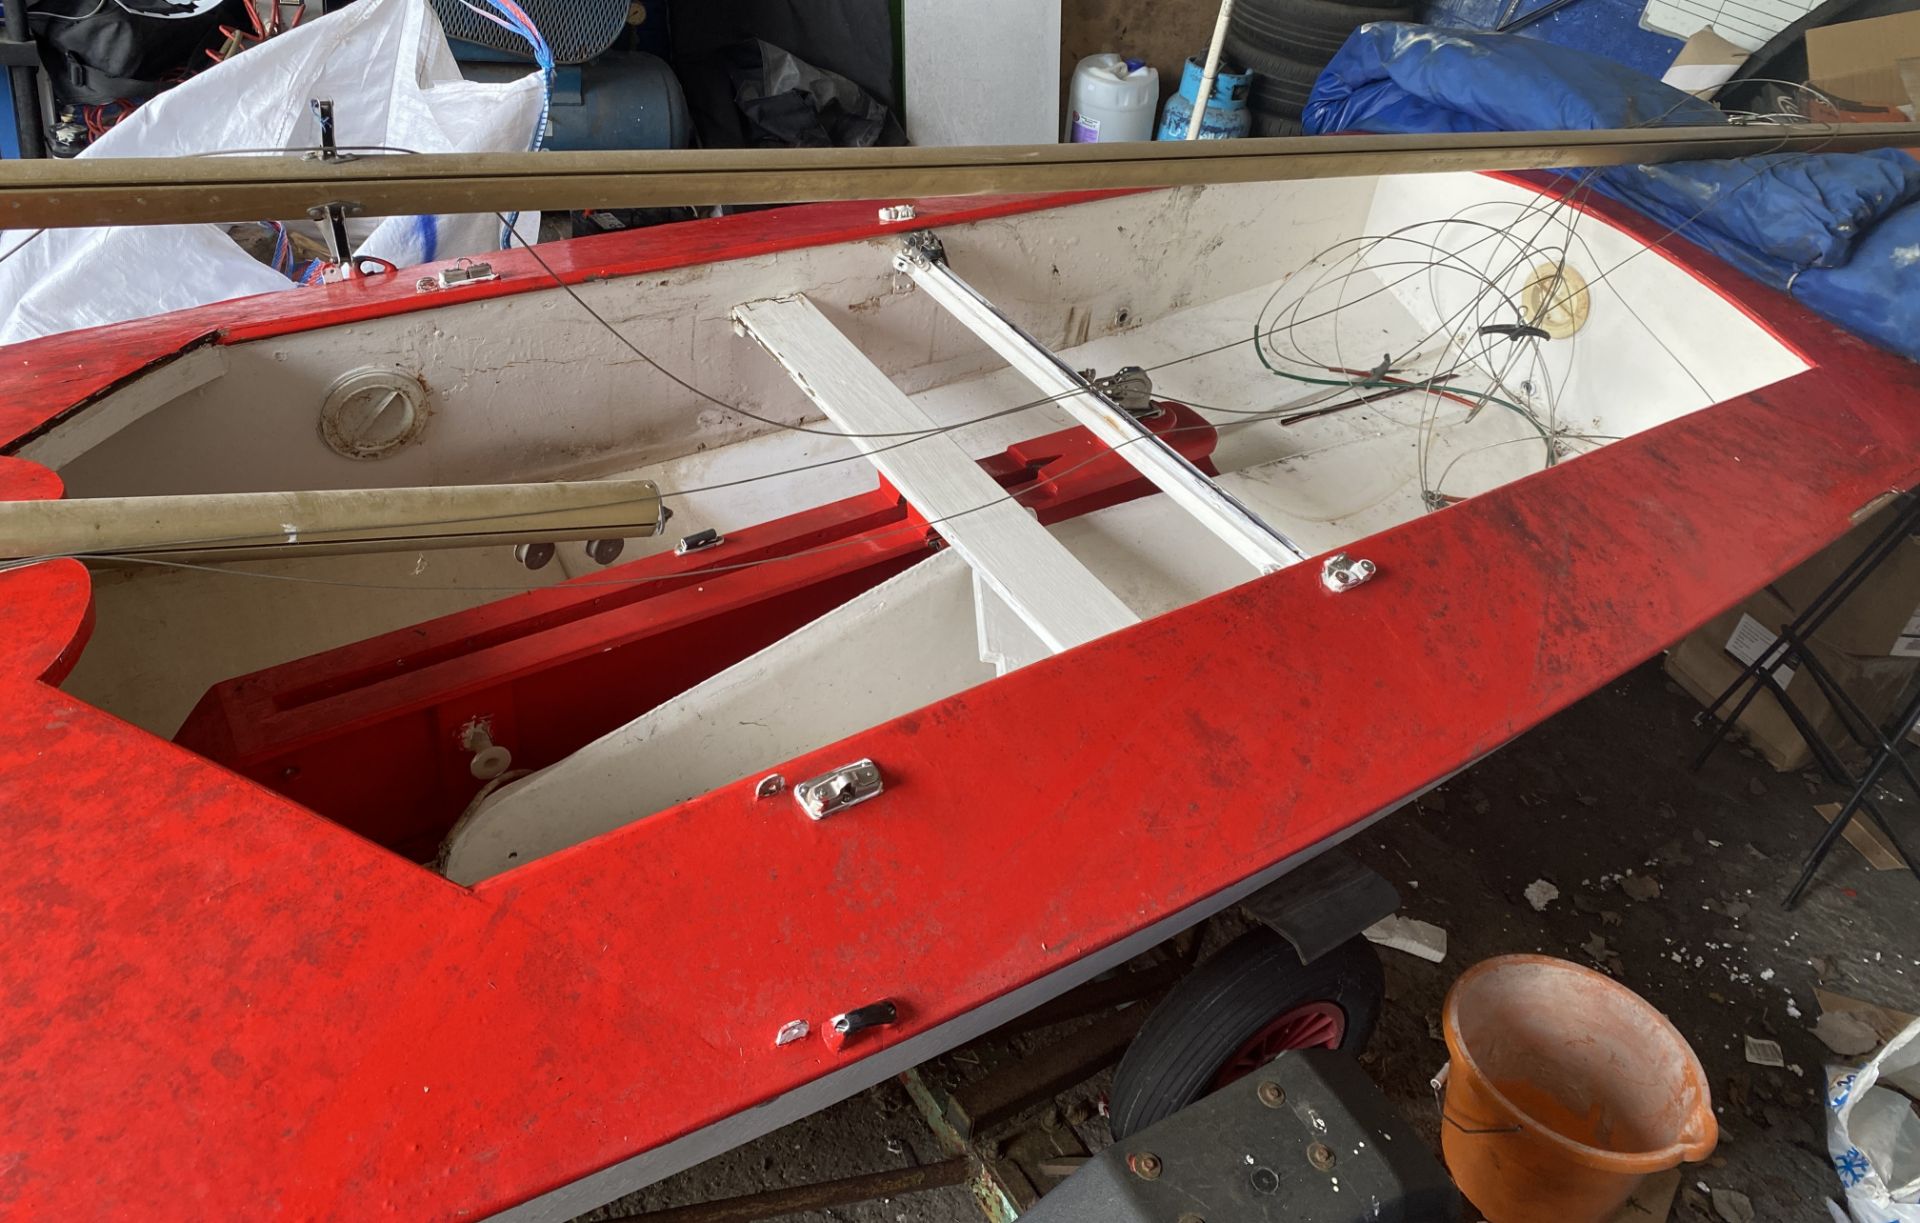 Red and white Fireball sailing boat with a 9' 9" (297cm) mast. - Image 22 of 24